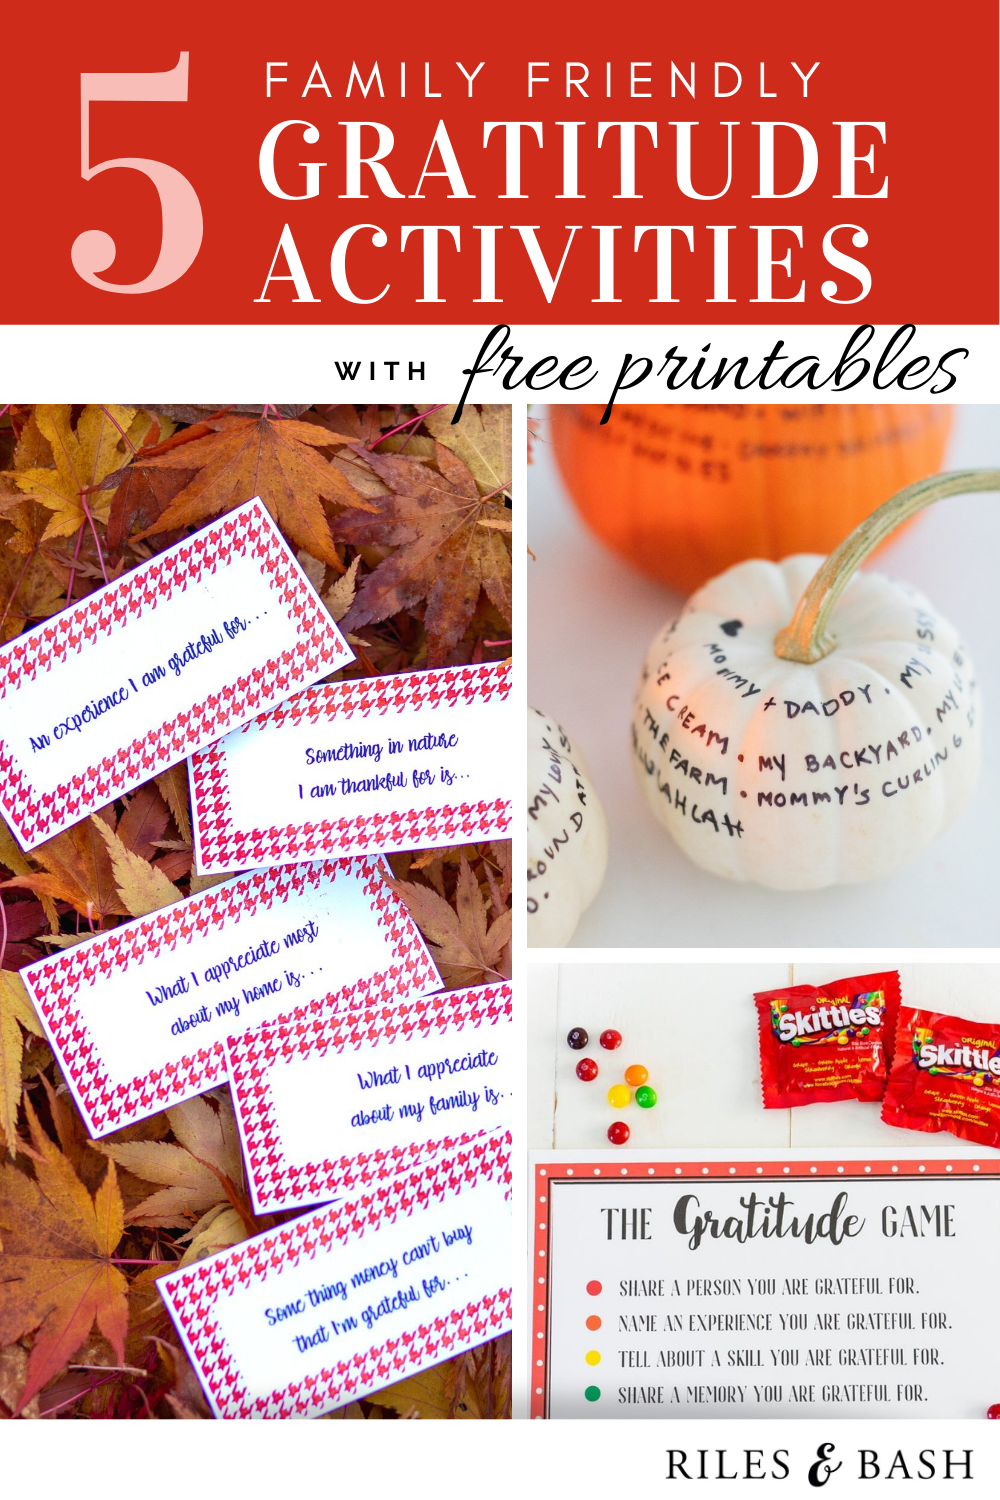 Riles & Bash_5 Family Friendly Gratitude Activities with Free Printables_Thanksgiving Activities